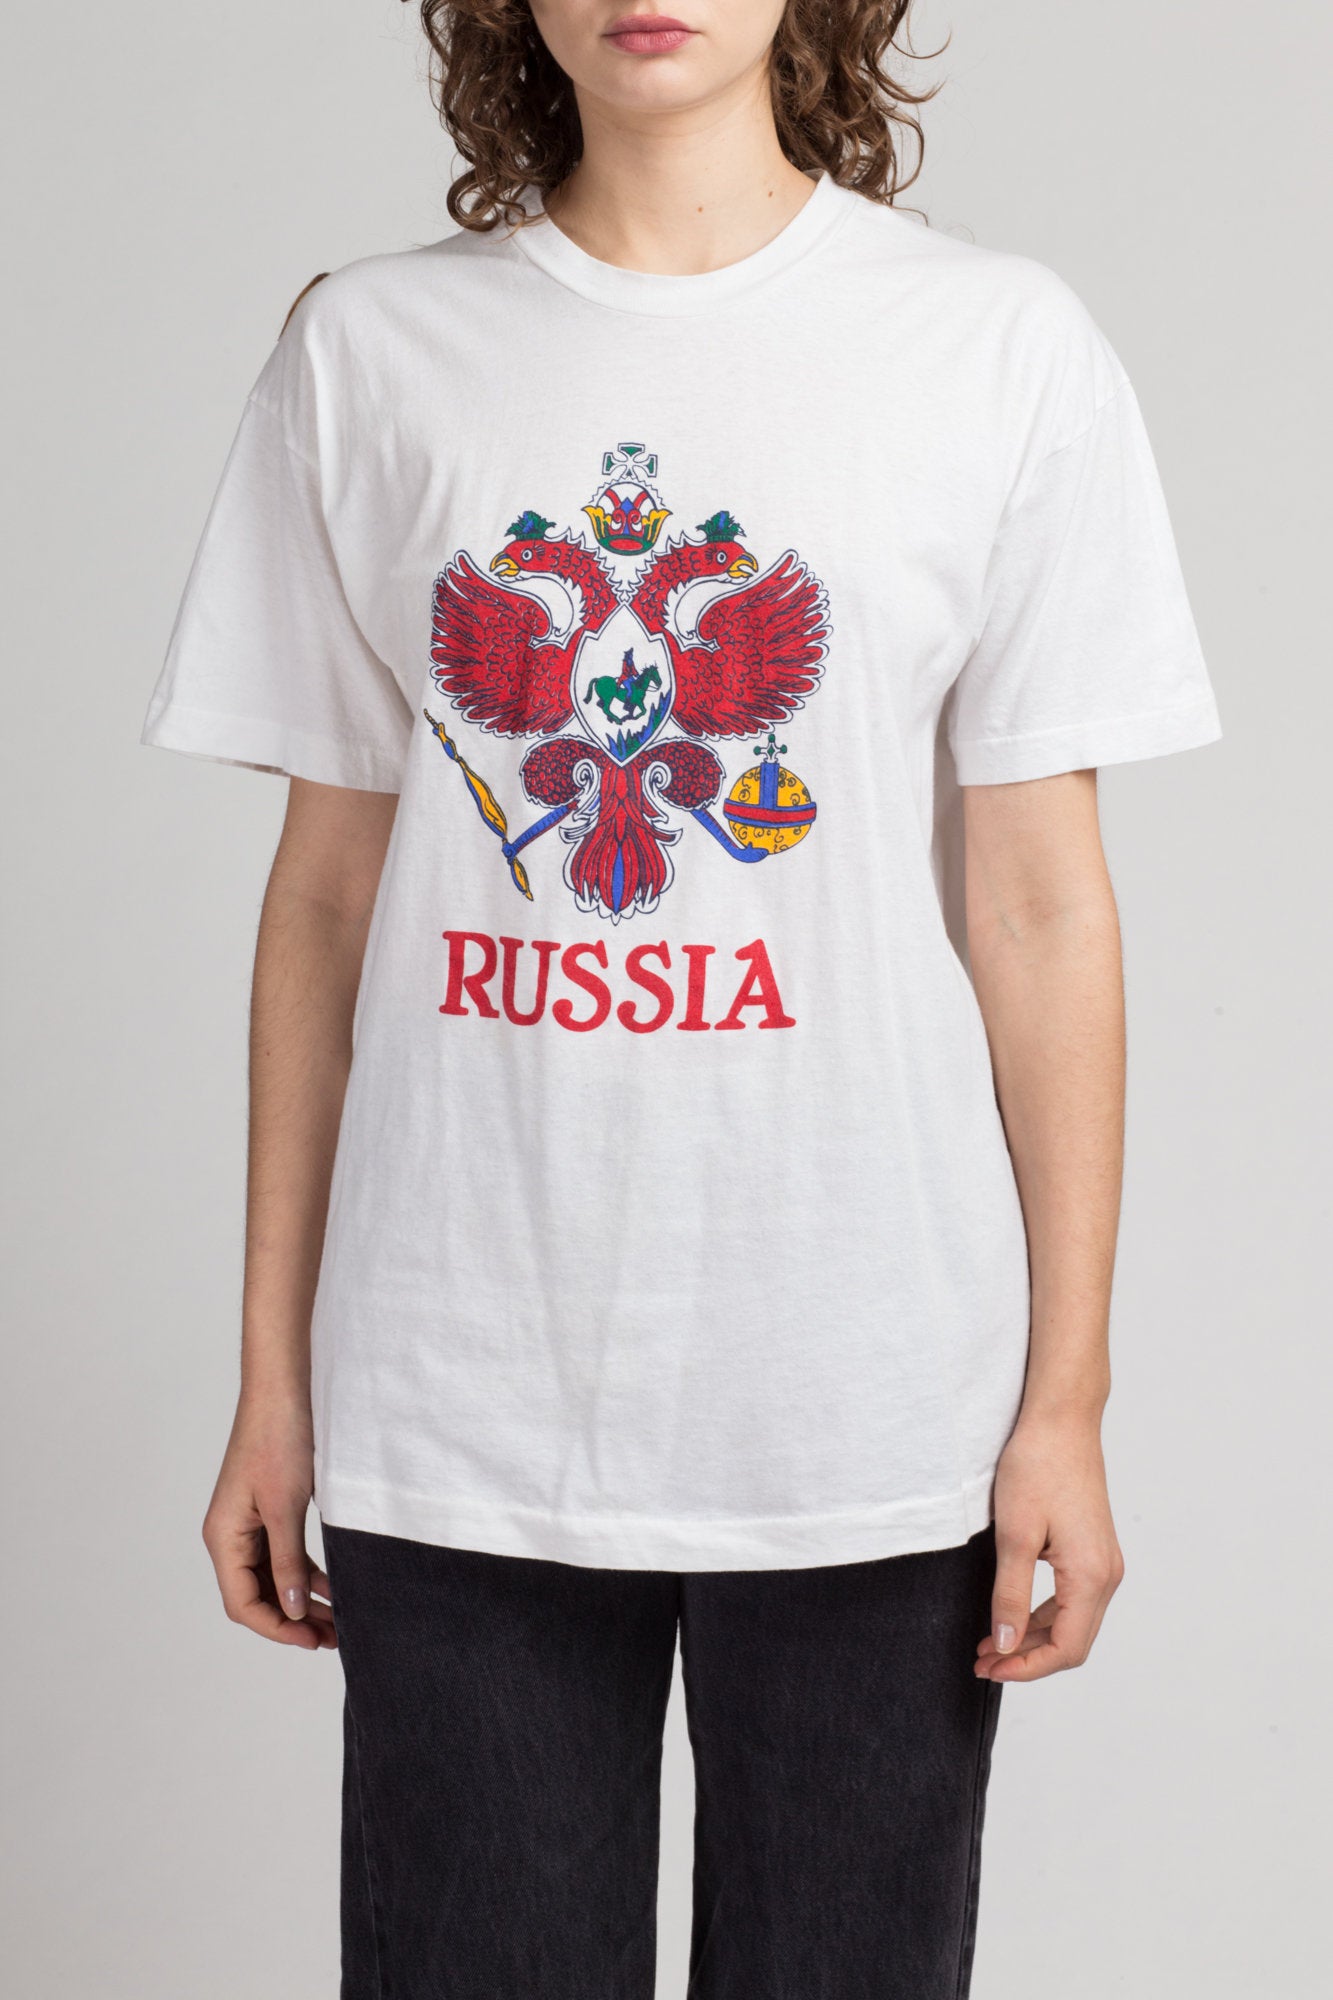 Vintage Russia T Shirt - Large | 80s 90s Unisex Russian Coat of Arms Graphic Tourist Travel Tee